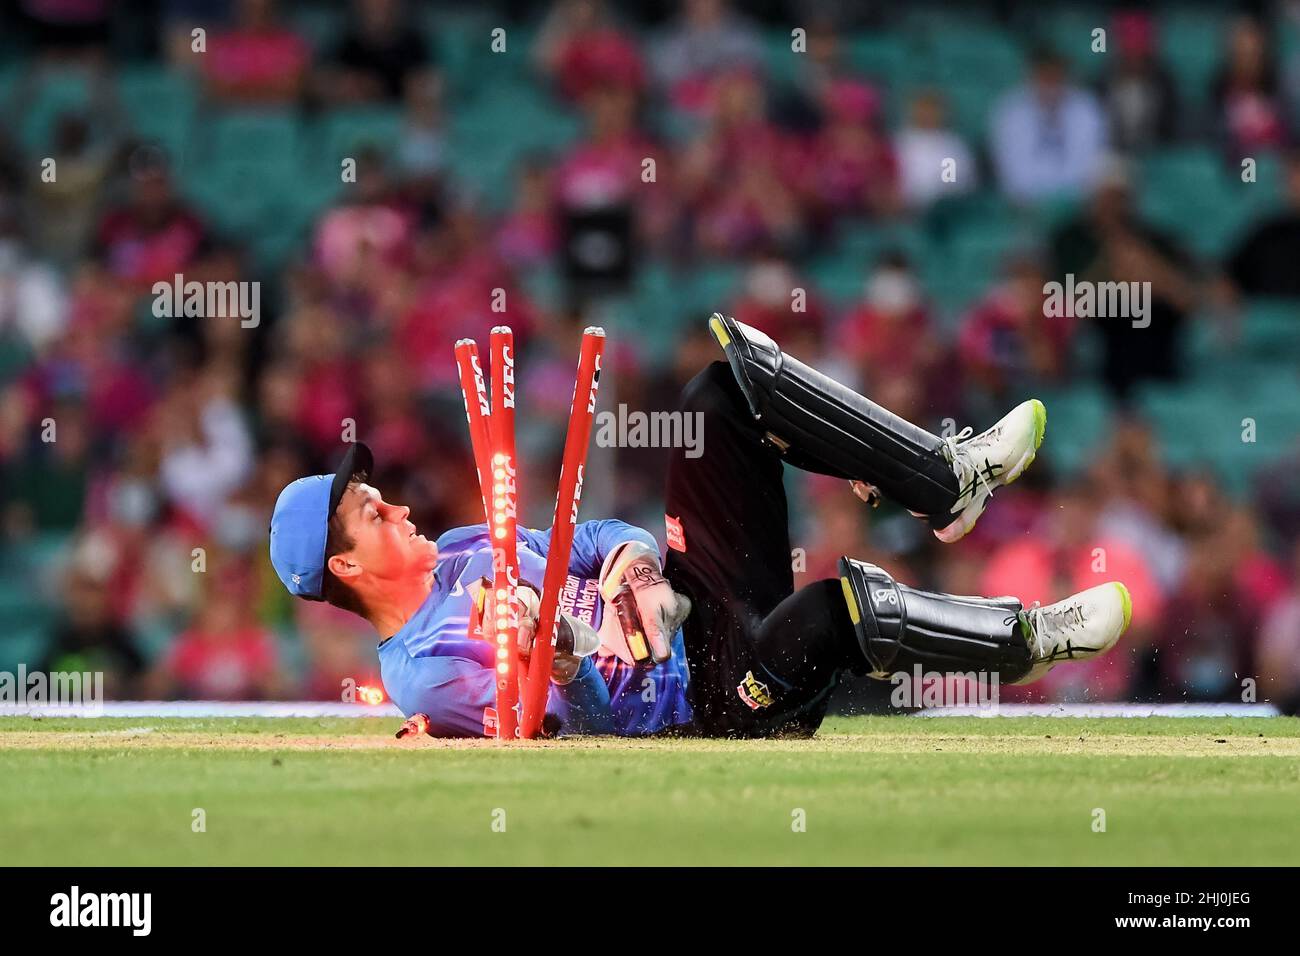 Sydney, Australia, 26 January, 2022. Ben Dwarshuis of the Sixers ran out by Alex Carey of the Strikers during the Big Bash League Challenger cricket match between Sydney Sixers and Adelaide Strikers at The Sydney Cricket Ground on January 26, 2022 in Sydney, Australia. Credit: Steven Markham/Speed Media/Alamy Live News Stock Photo